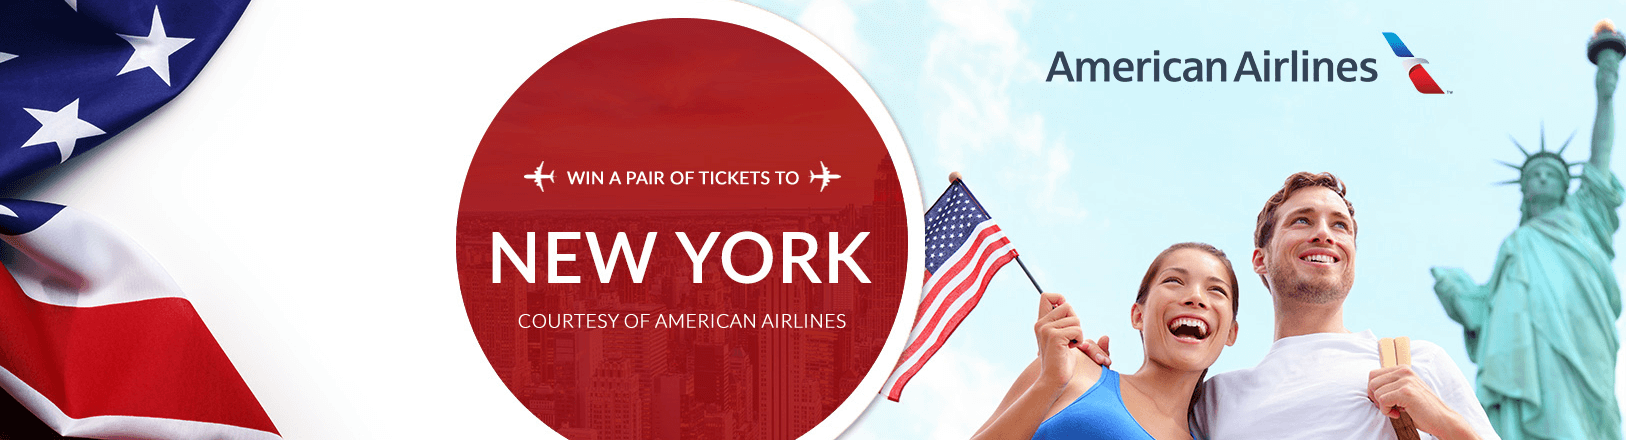 Win free American Airlines tickets to New York with Brightsun Travel